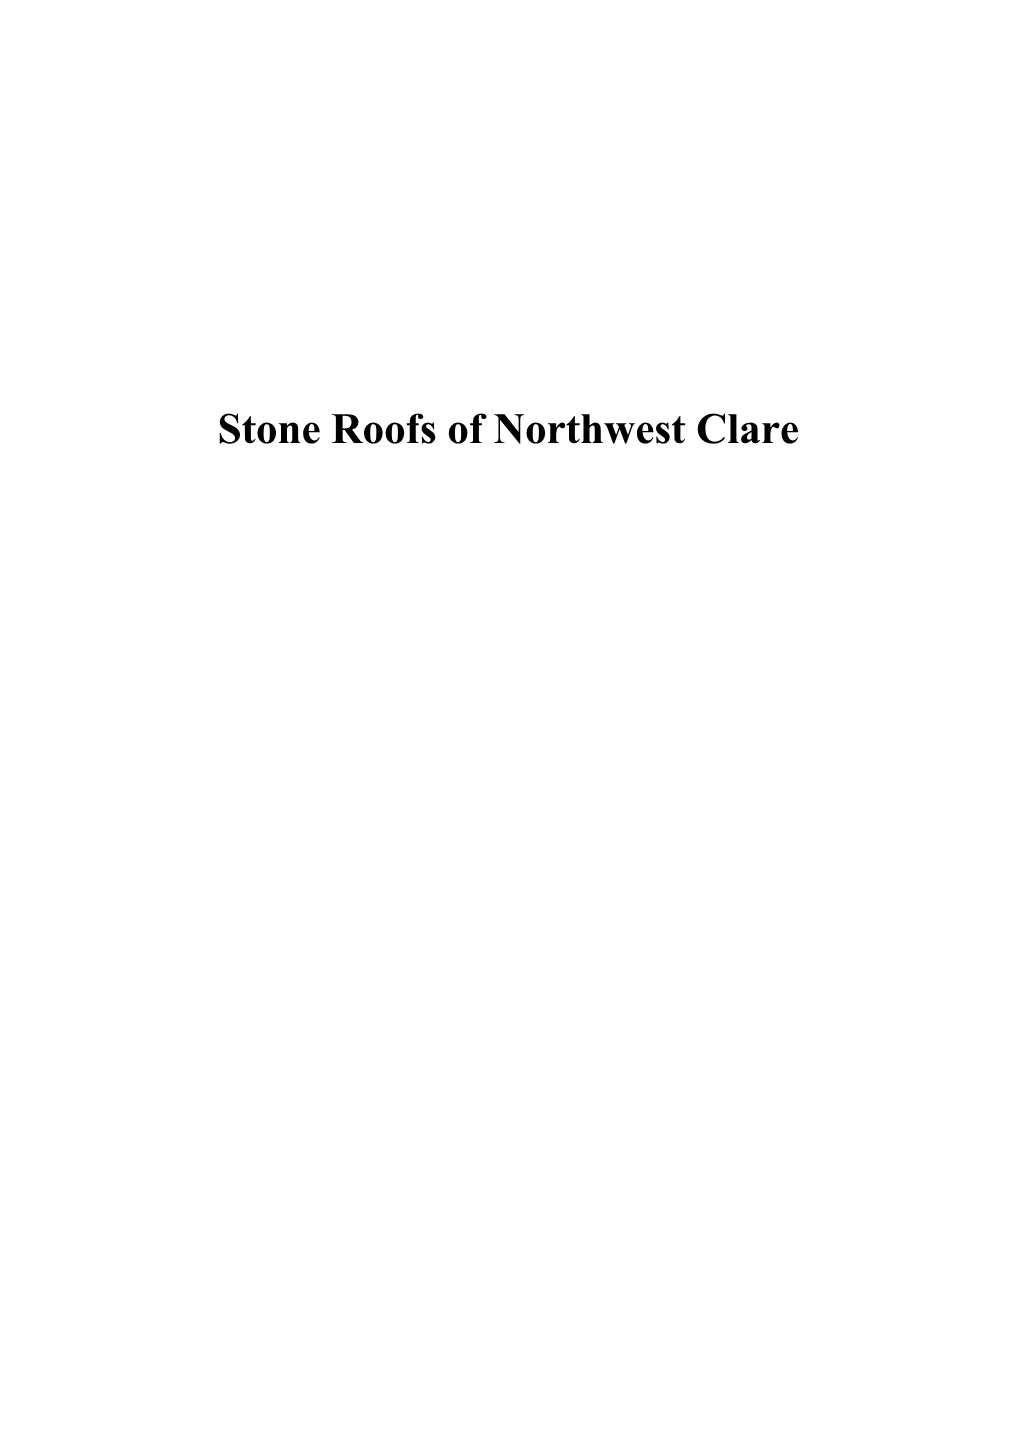 The Stone Roofs of NW Clare.Pdf